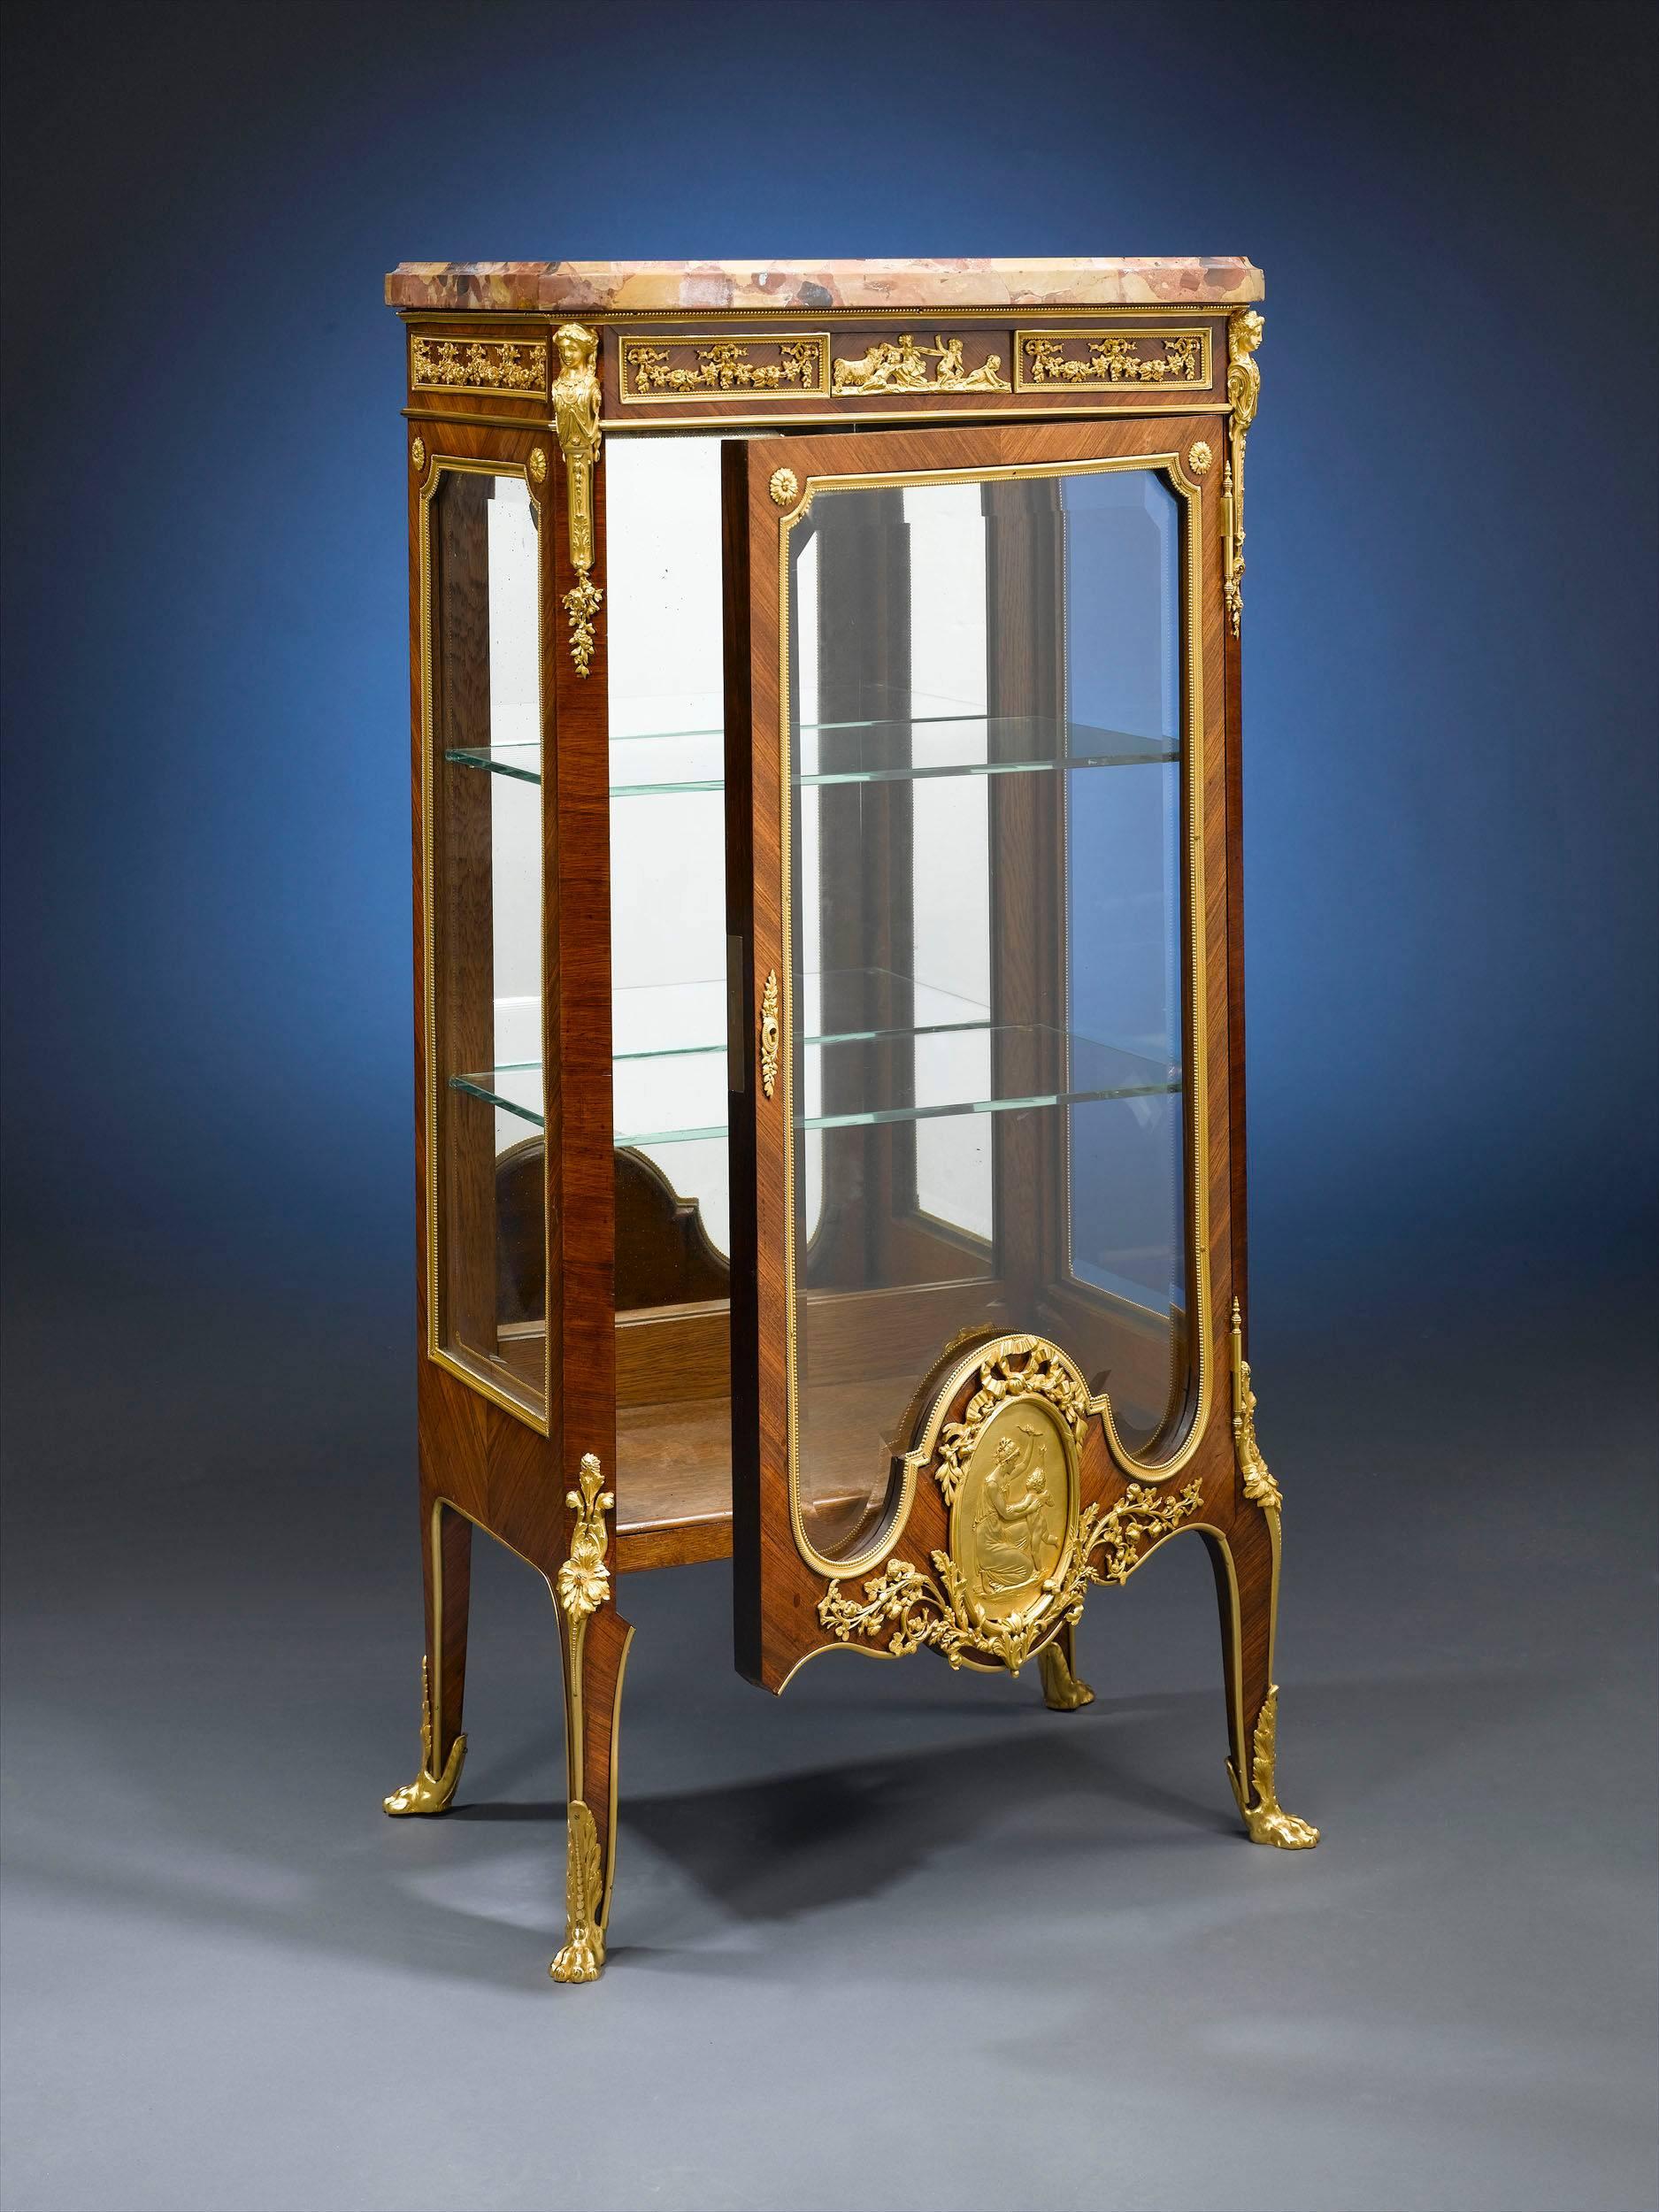 This exquisite kingwood and ormolu vitrine was crafted by François Linke, the finest and most renowned ébéniste of the 19th-early 20th centuries. Beautifully fashioned in the style of Louis XVI, this lovely display cabinet features intricate inlay